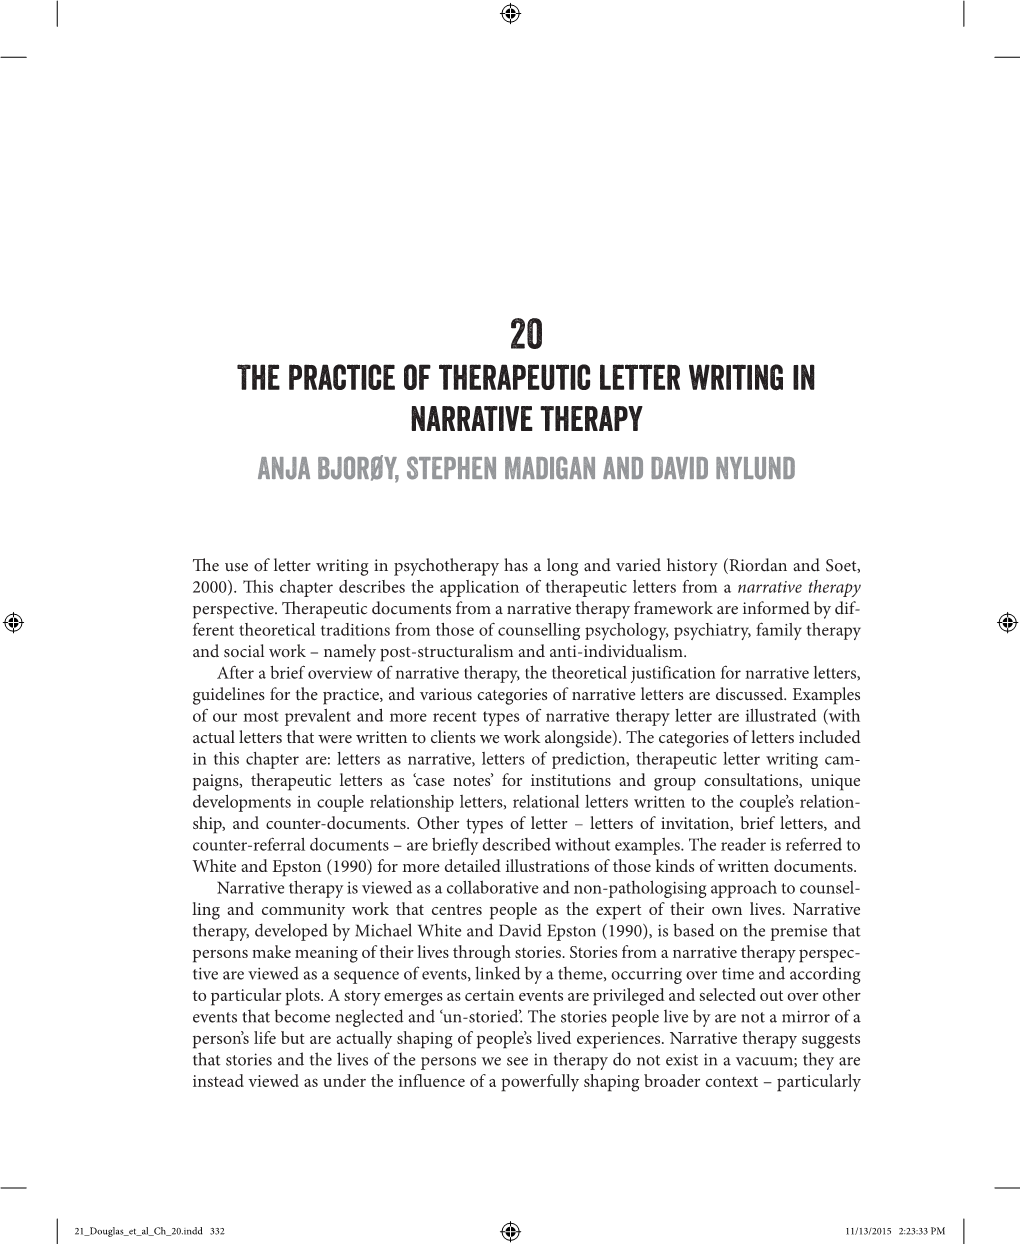 The Practice of Therapeutic Letter Writing in Narrative Therapy Anja Bjorøy, Stephen Madigan and David Nylund